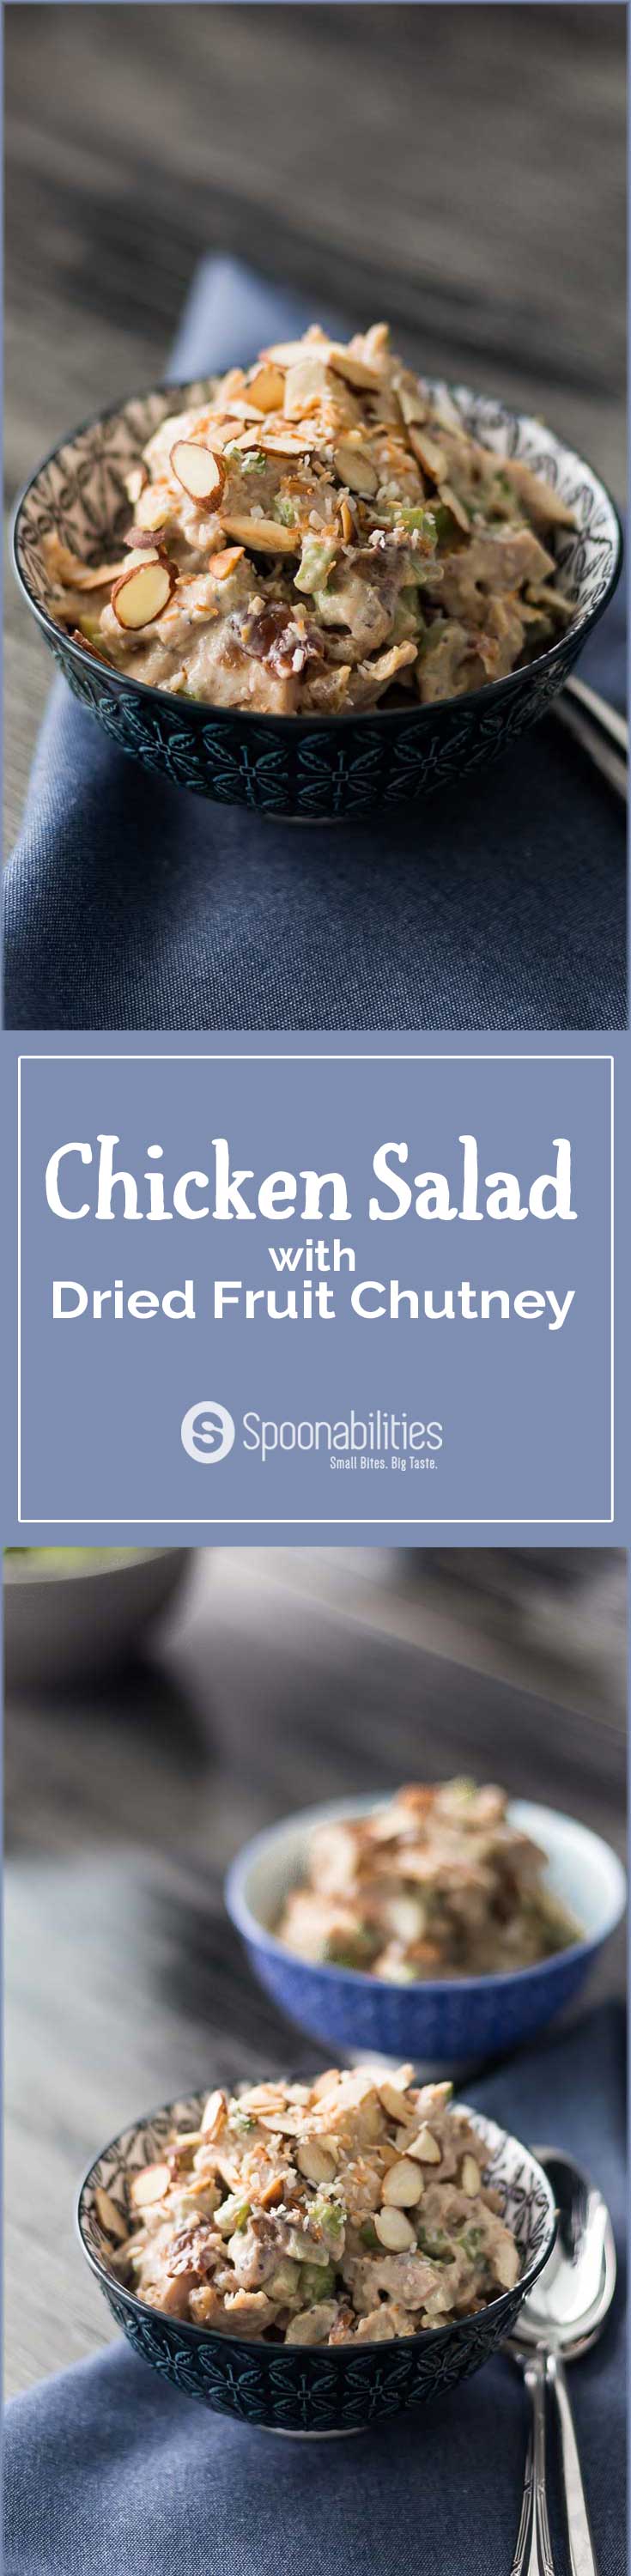 Easy Chicken Salad Recipe with Dried Fruit Chutney. Serve on lettuce & top with toasted almonds & toasted coconut flakes. This is unique and Tasty Salad. Spoonabilities.com